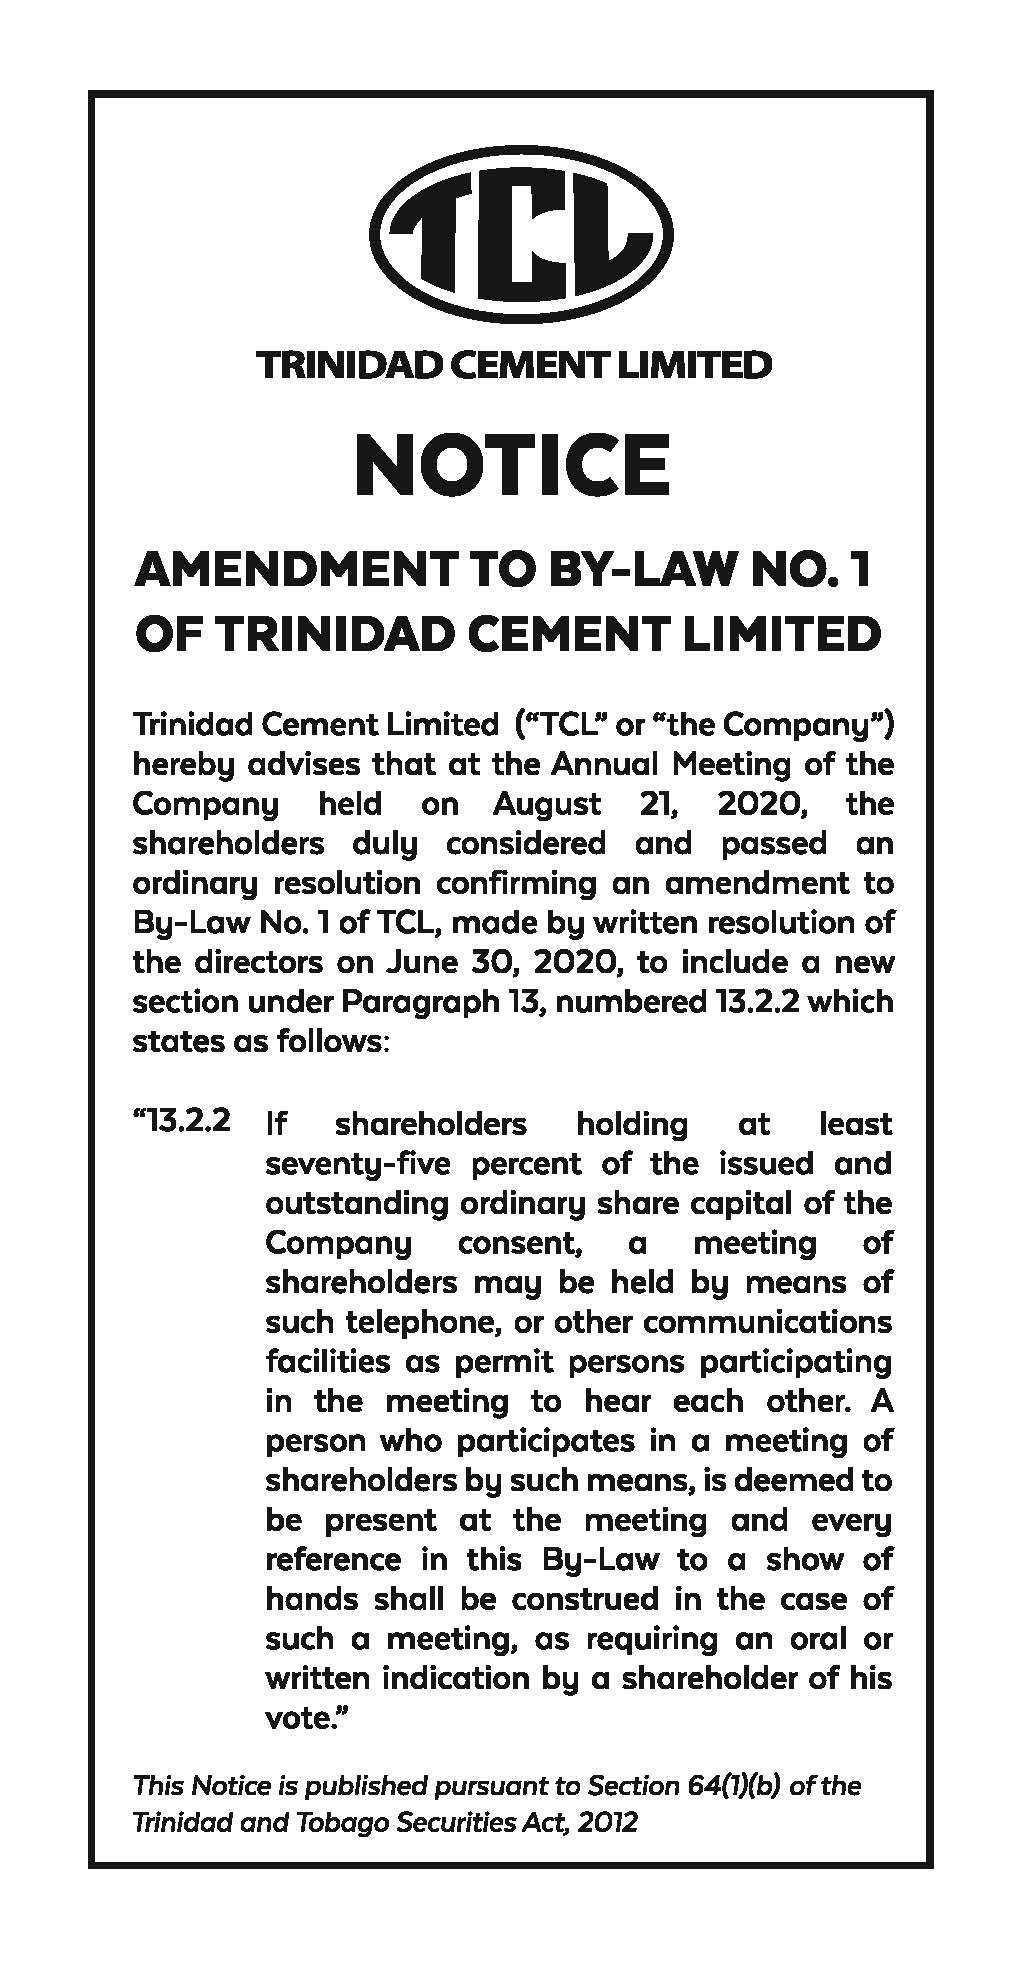 TCL NOTICE AD-15X2-Notice of Material Change - AMENDMENT TO BY-LAW NO. 1-FAW